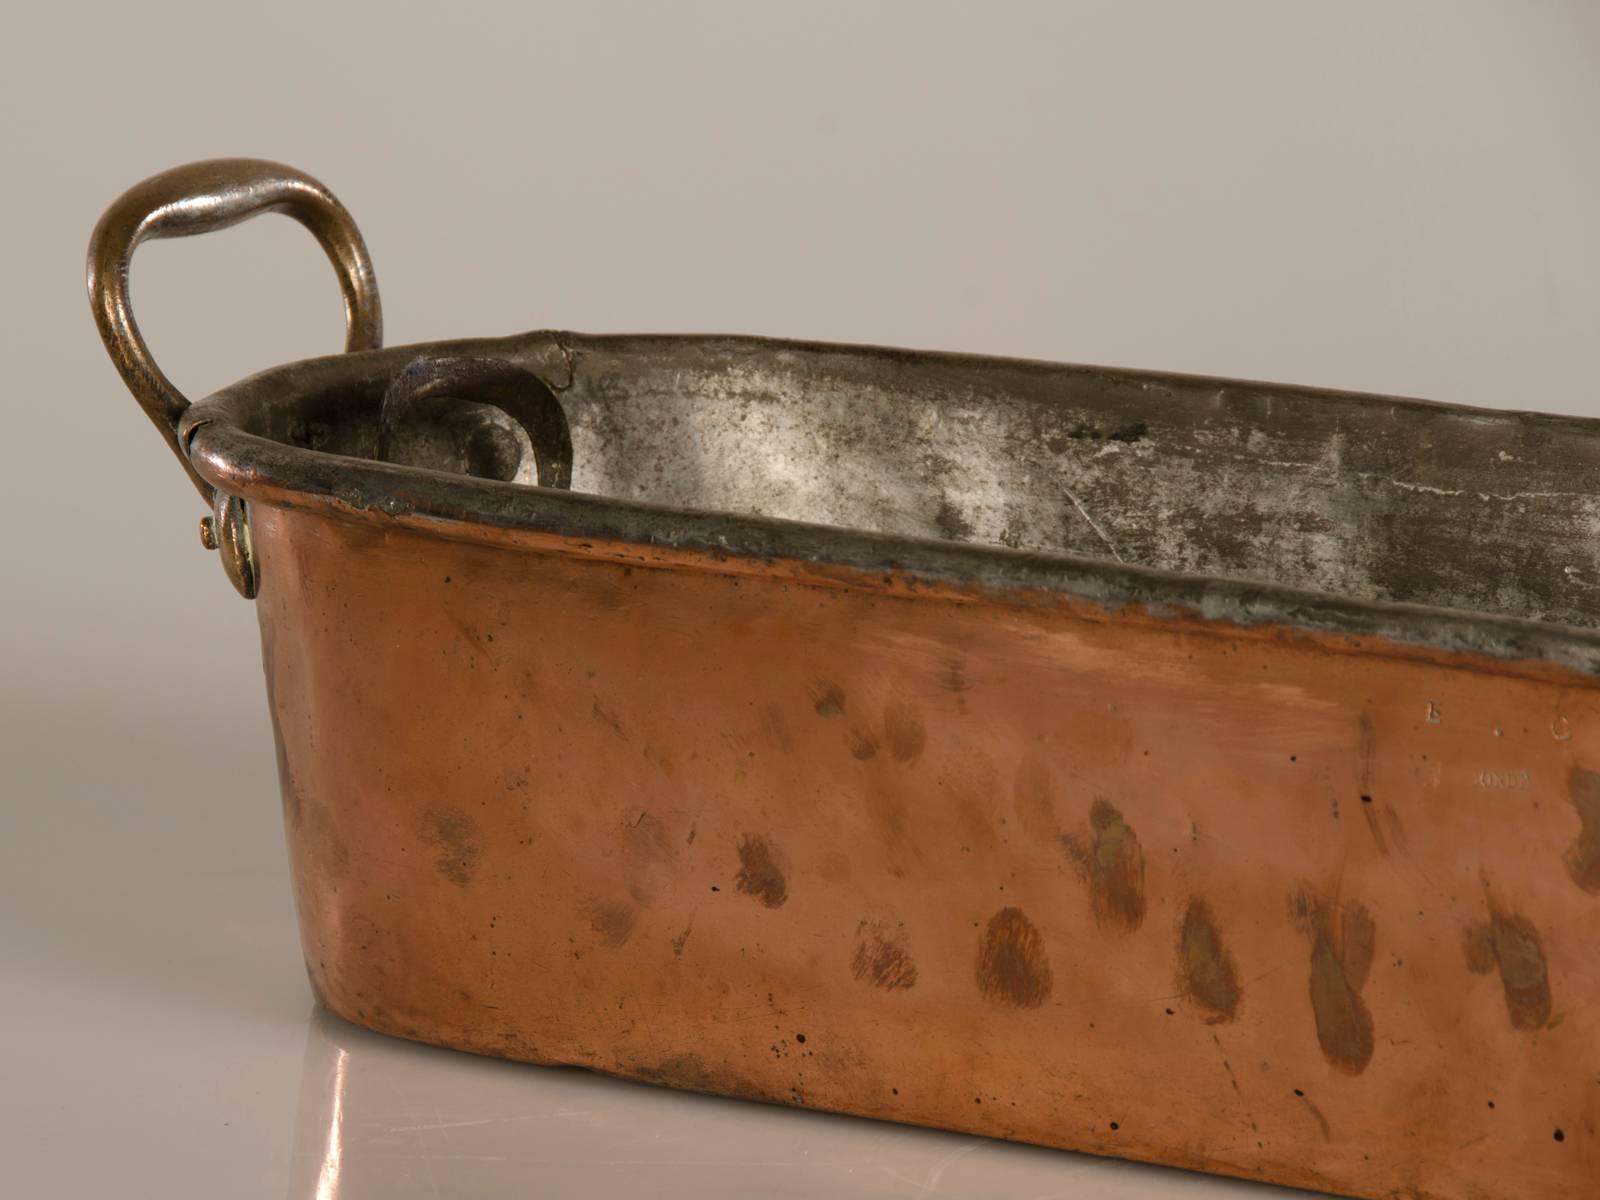 Be the first to see our new arrivals directly through 1stdibs! Please click follow dealer below. 

A rare oblong copper fish poacher with its original monogrammed liner from France, circa 1875. This is true surviving rarity from the kitchen of a